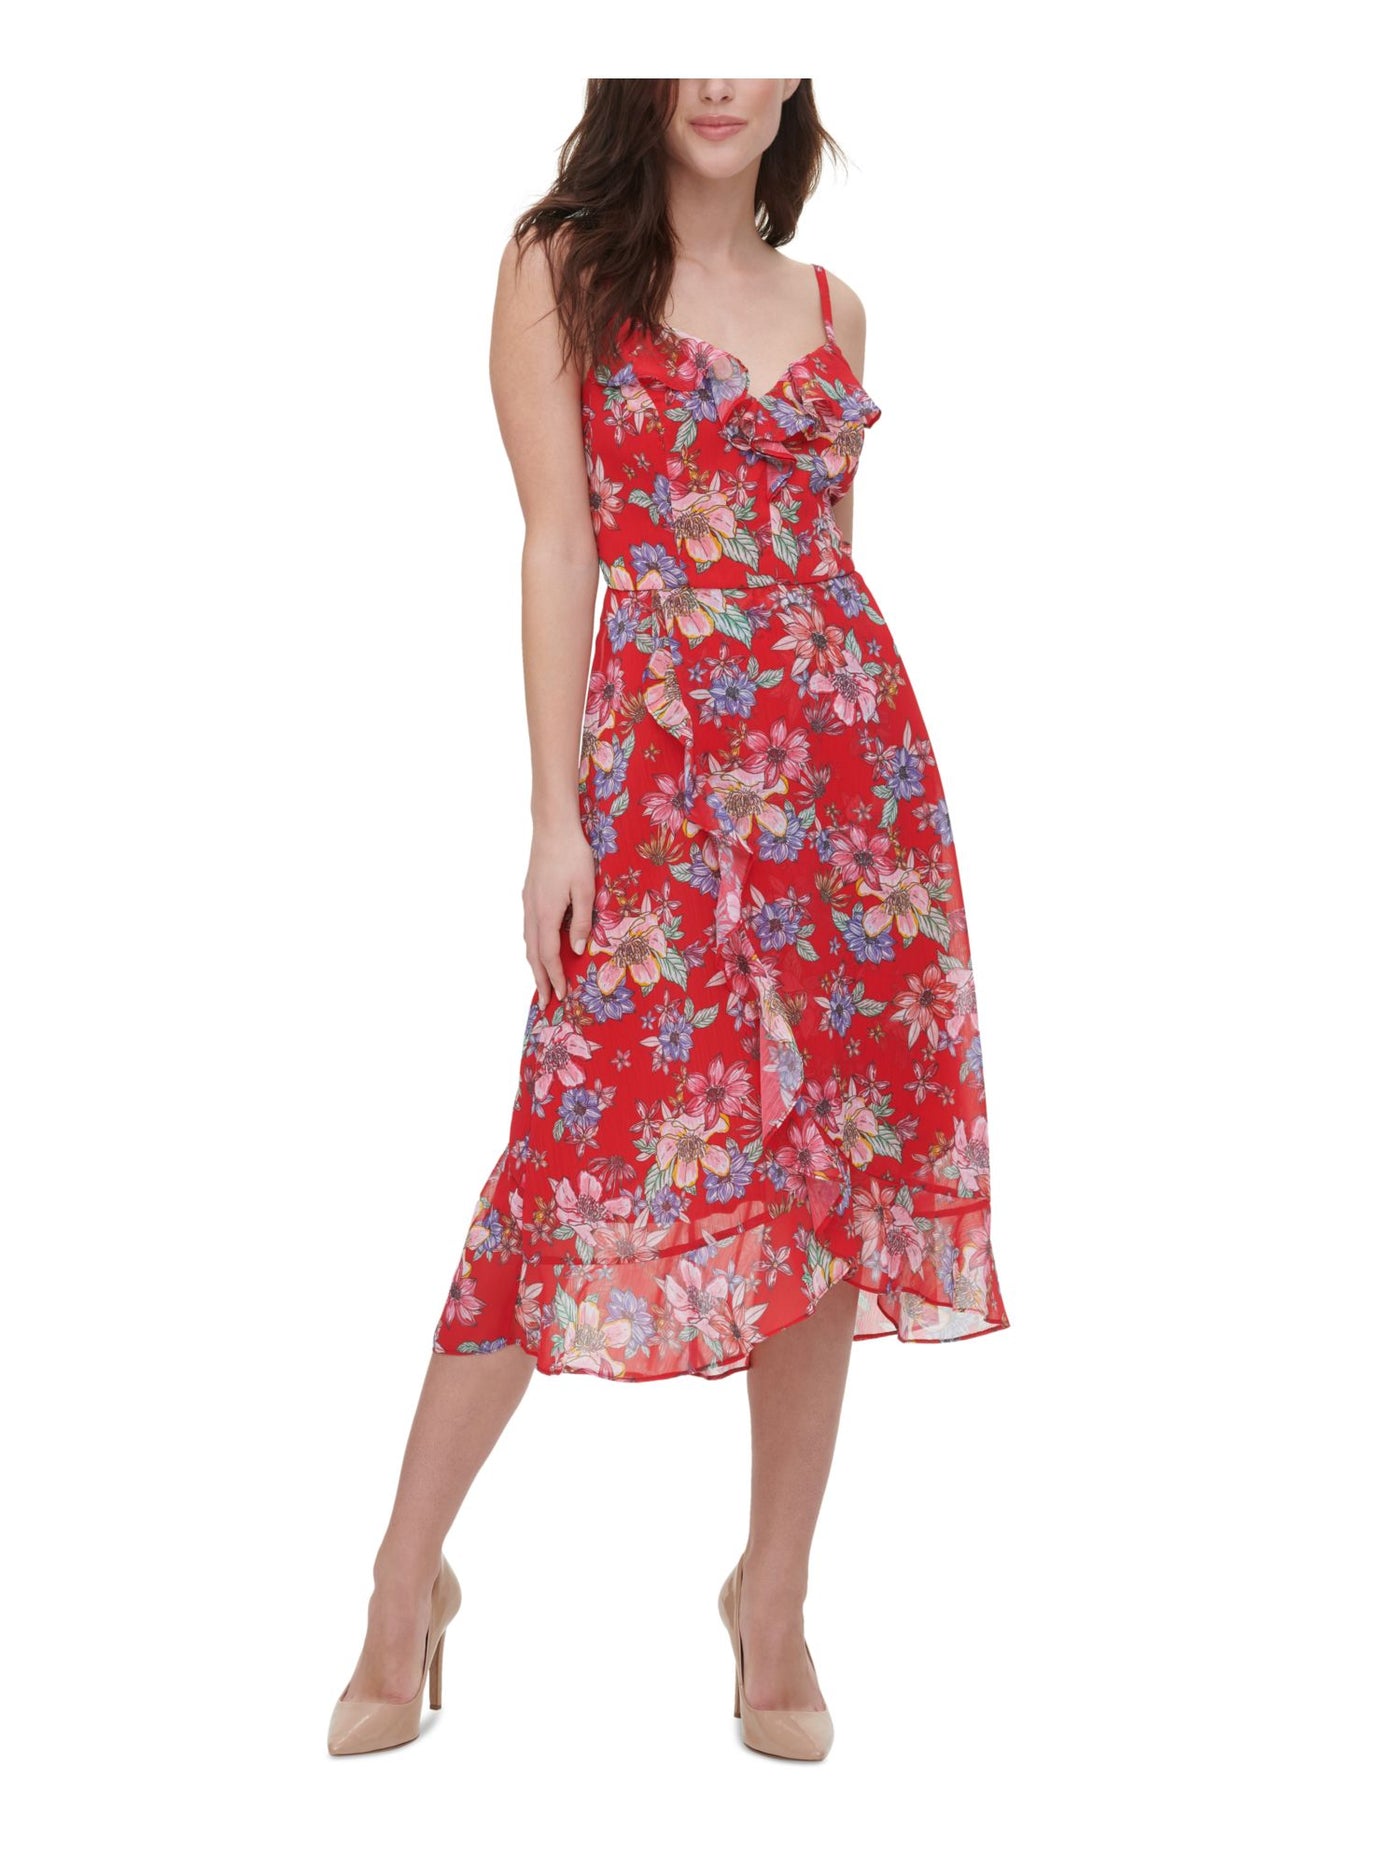 KENSIE Womens Red Zippered Ruffled Adjustable Straps Floral Spaghetti Strap V Neck Midi Cocktail Fit + Flare Dress 6